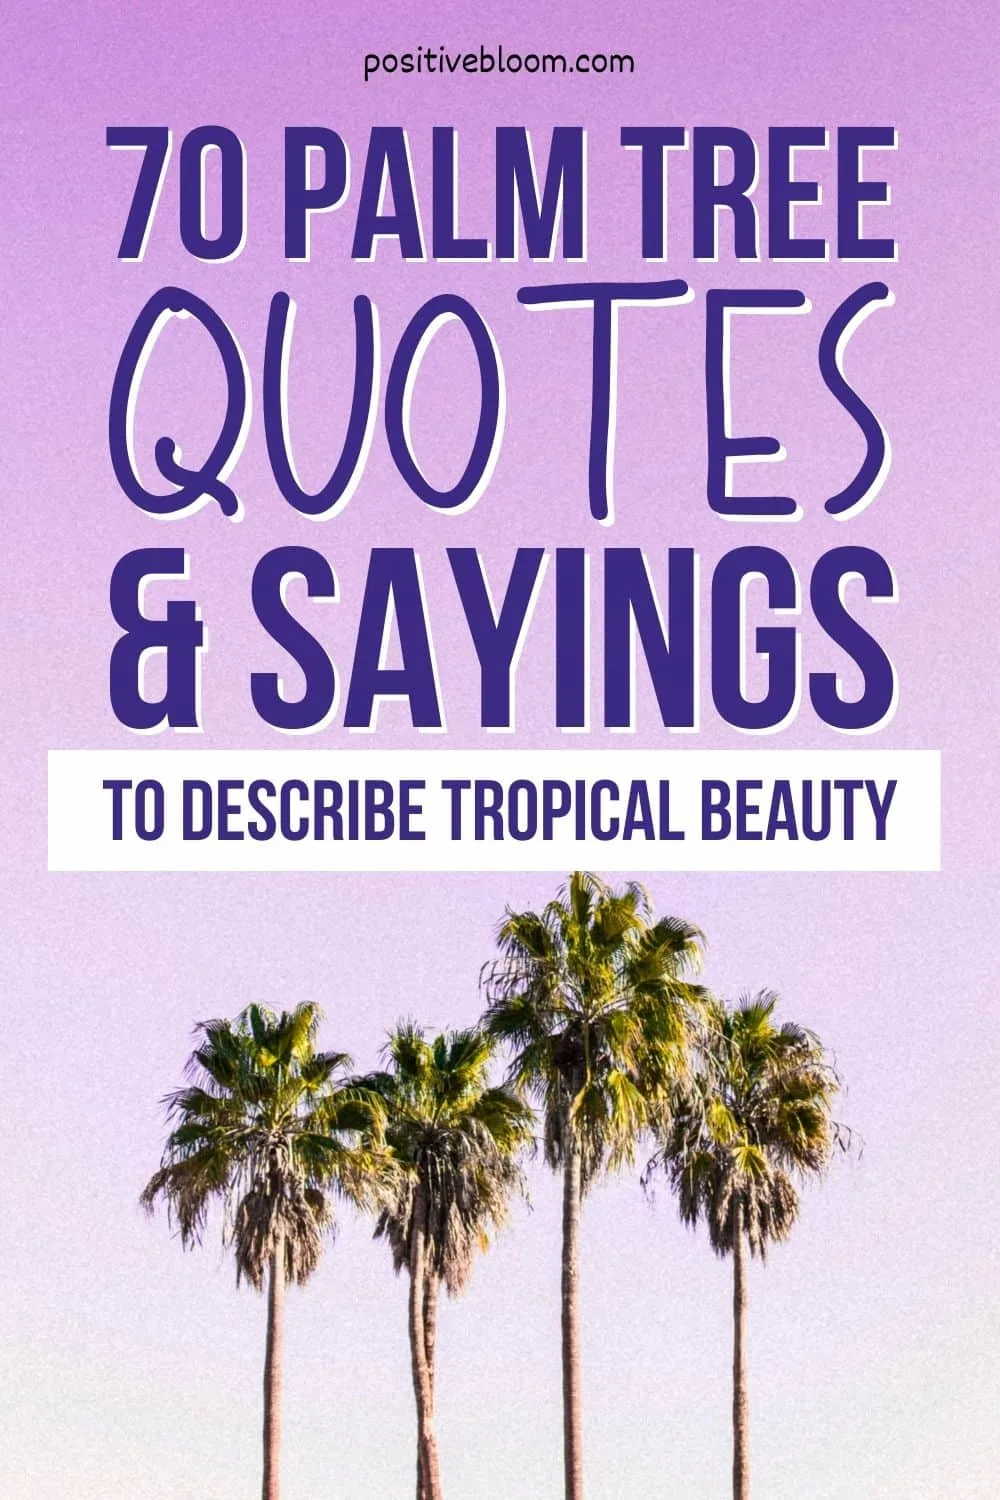 70 Palm Tree Quotes & Sayings To Describe Tropical Beauty Pinterest